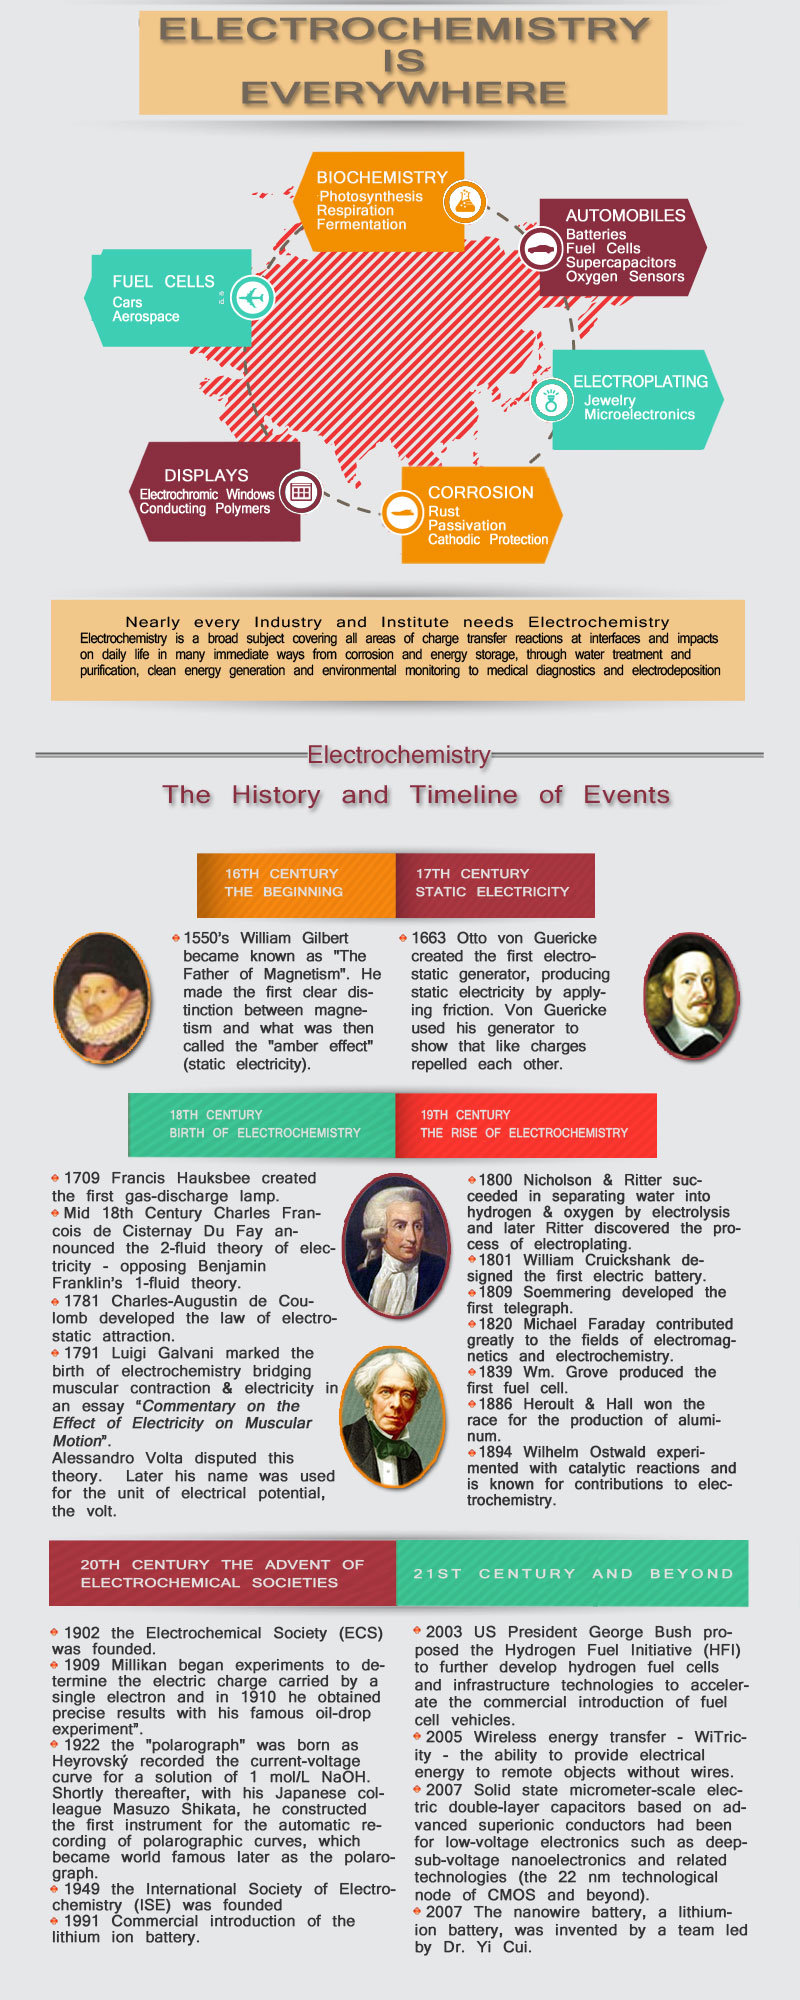 Nearly every Industry and Institute needs Electrochemistry.  This is a History and Timeline of Significant Events from Electrochemists